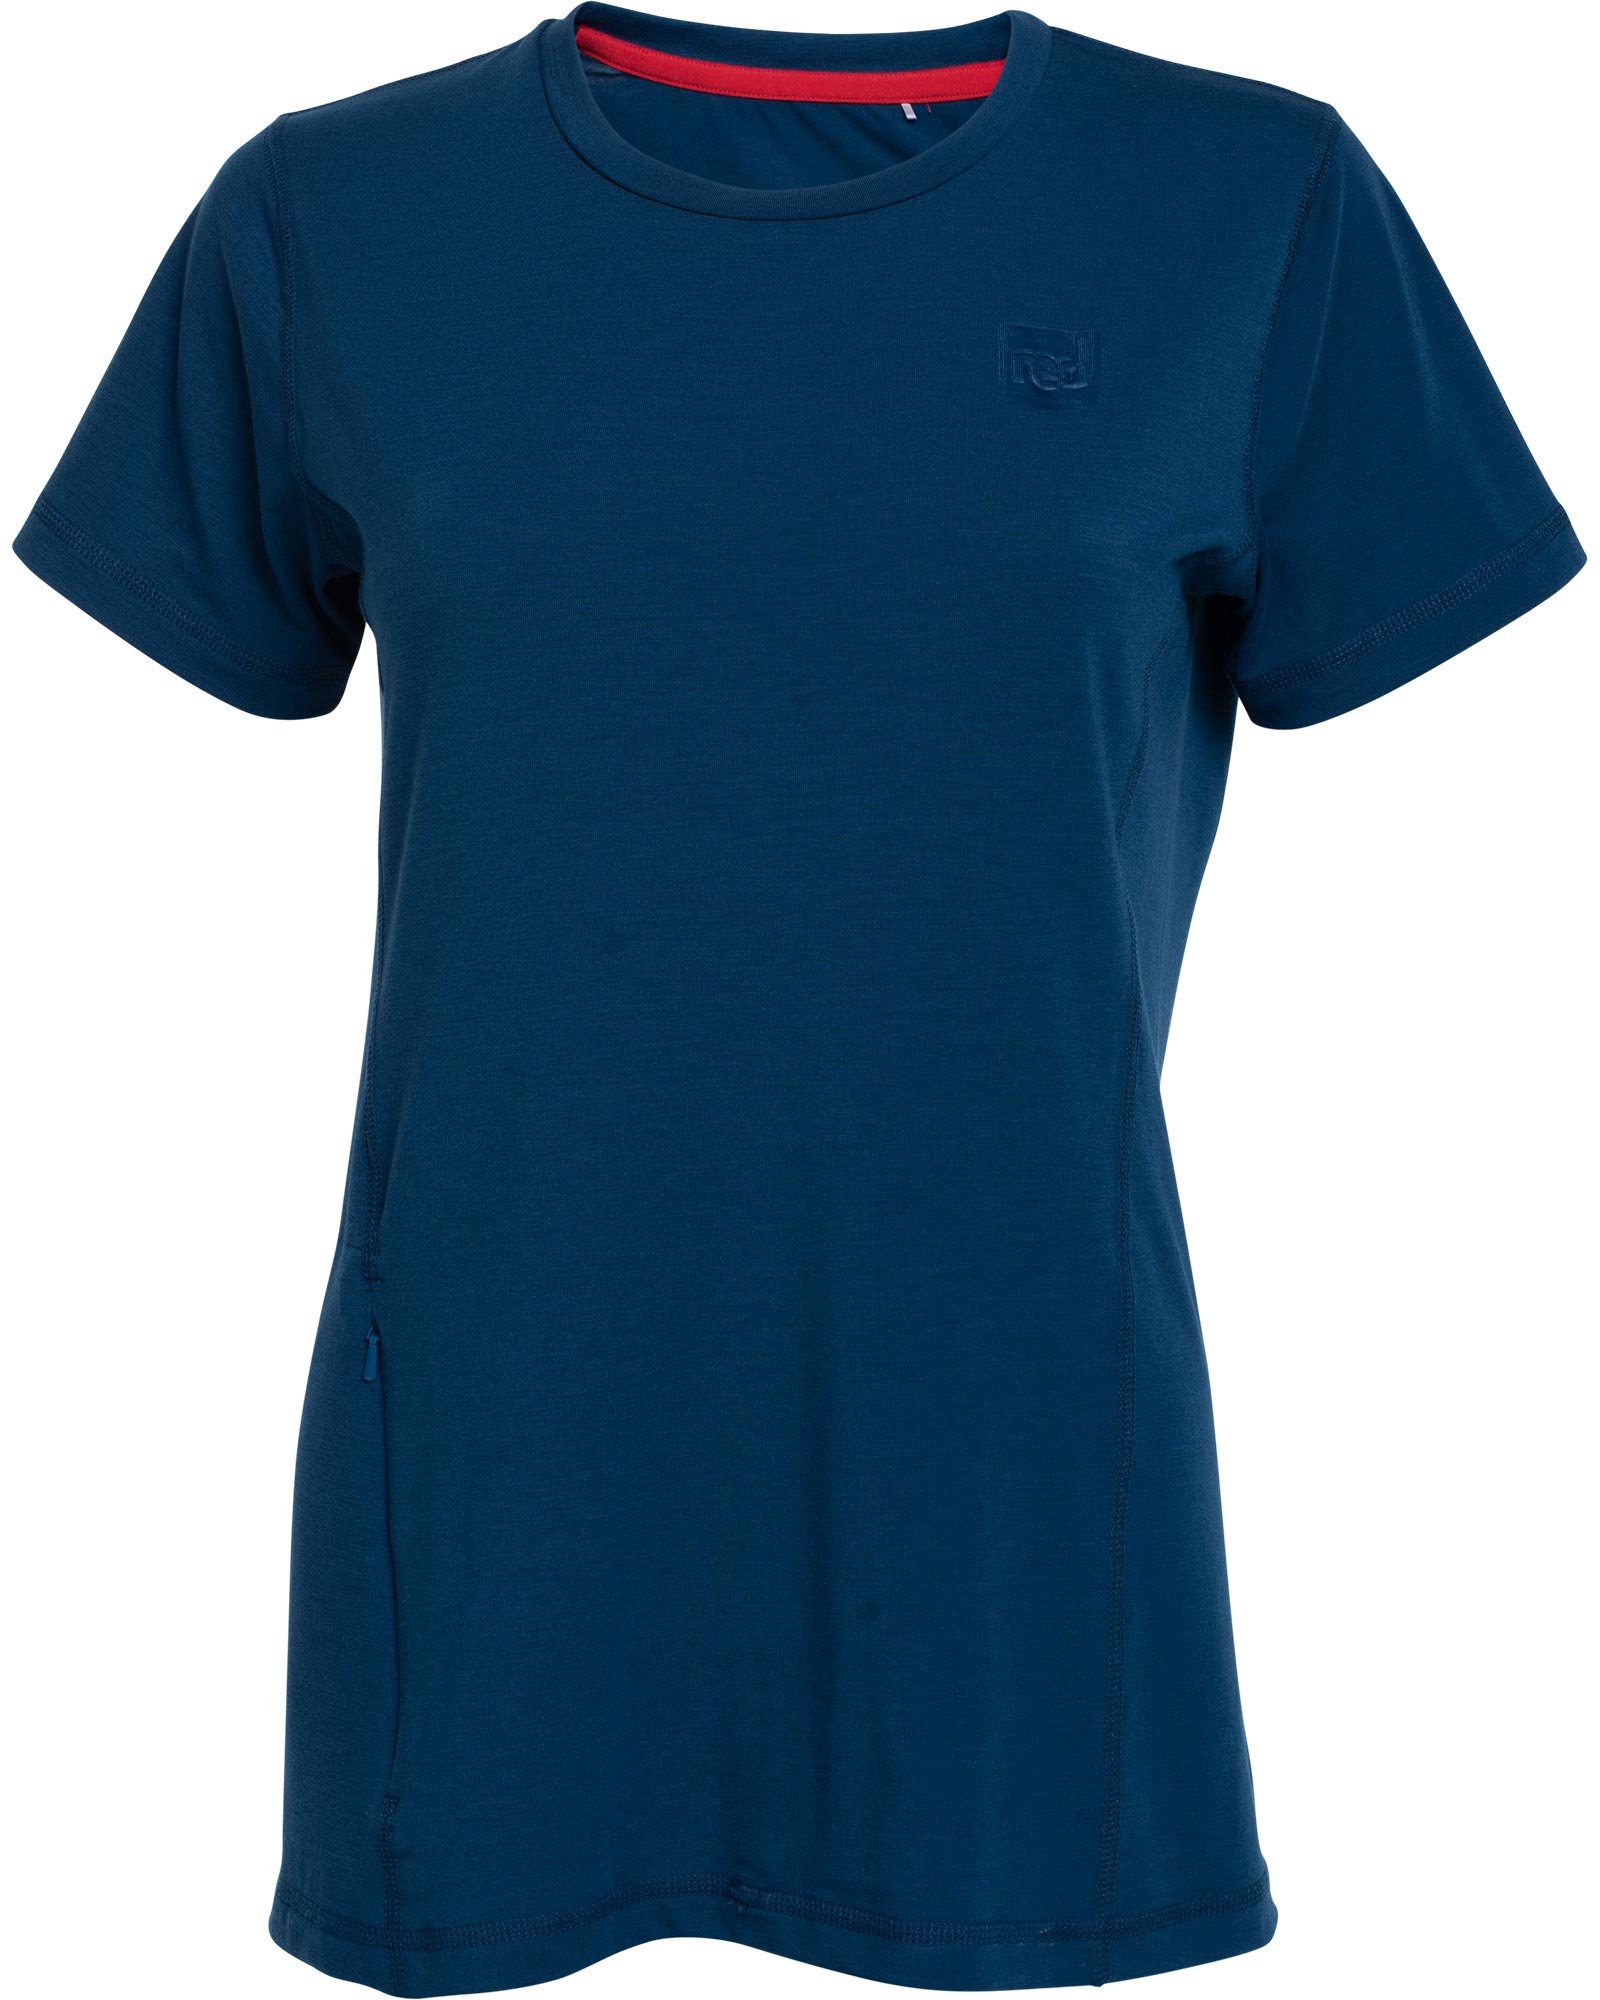 Red Paddle Co Performance Womens T-shirt